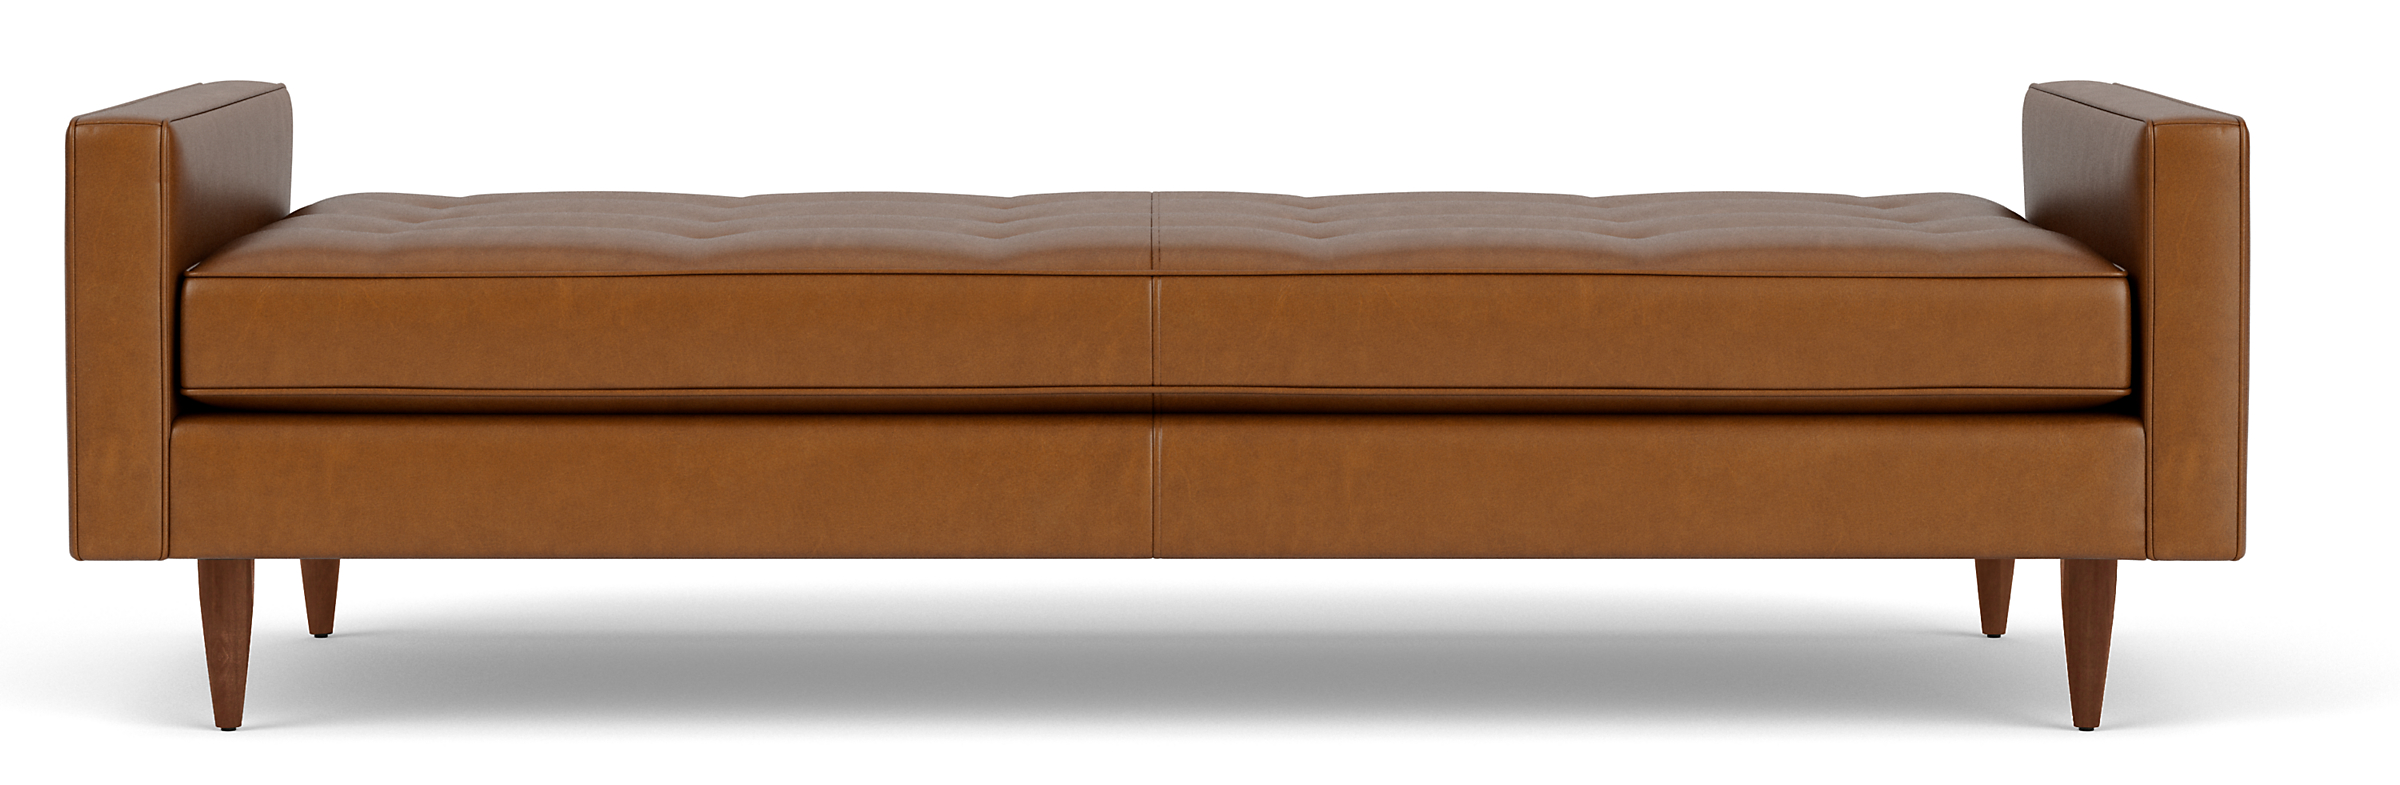 Reese Leather Daybed